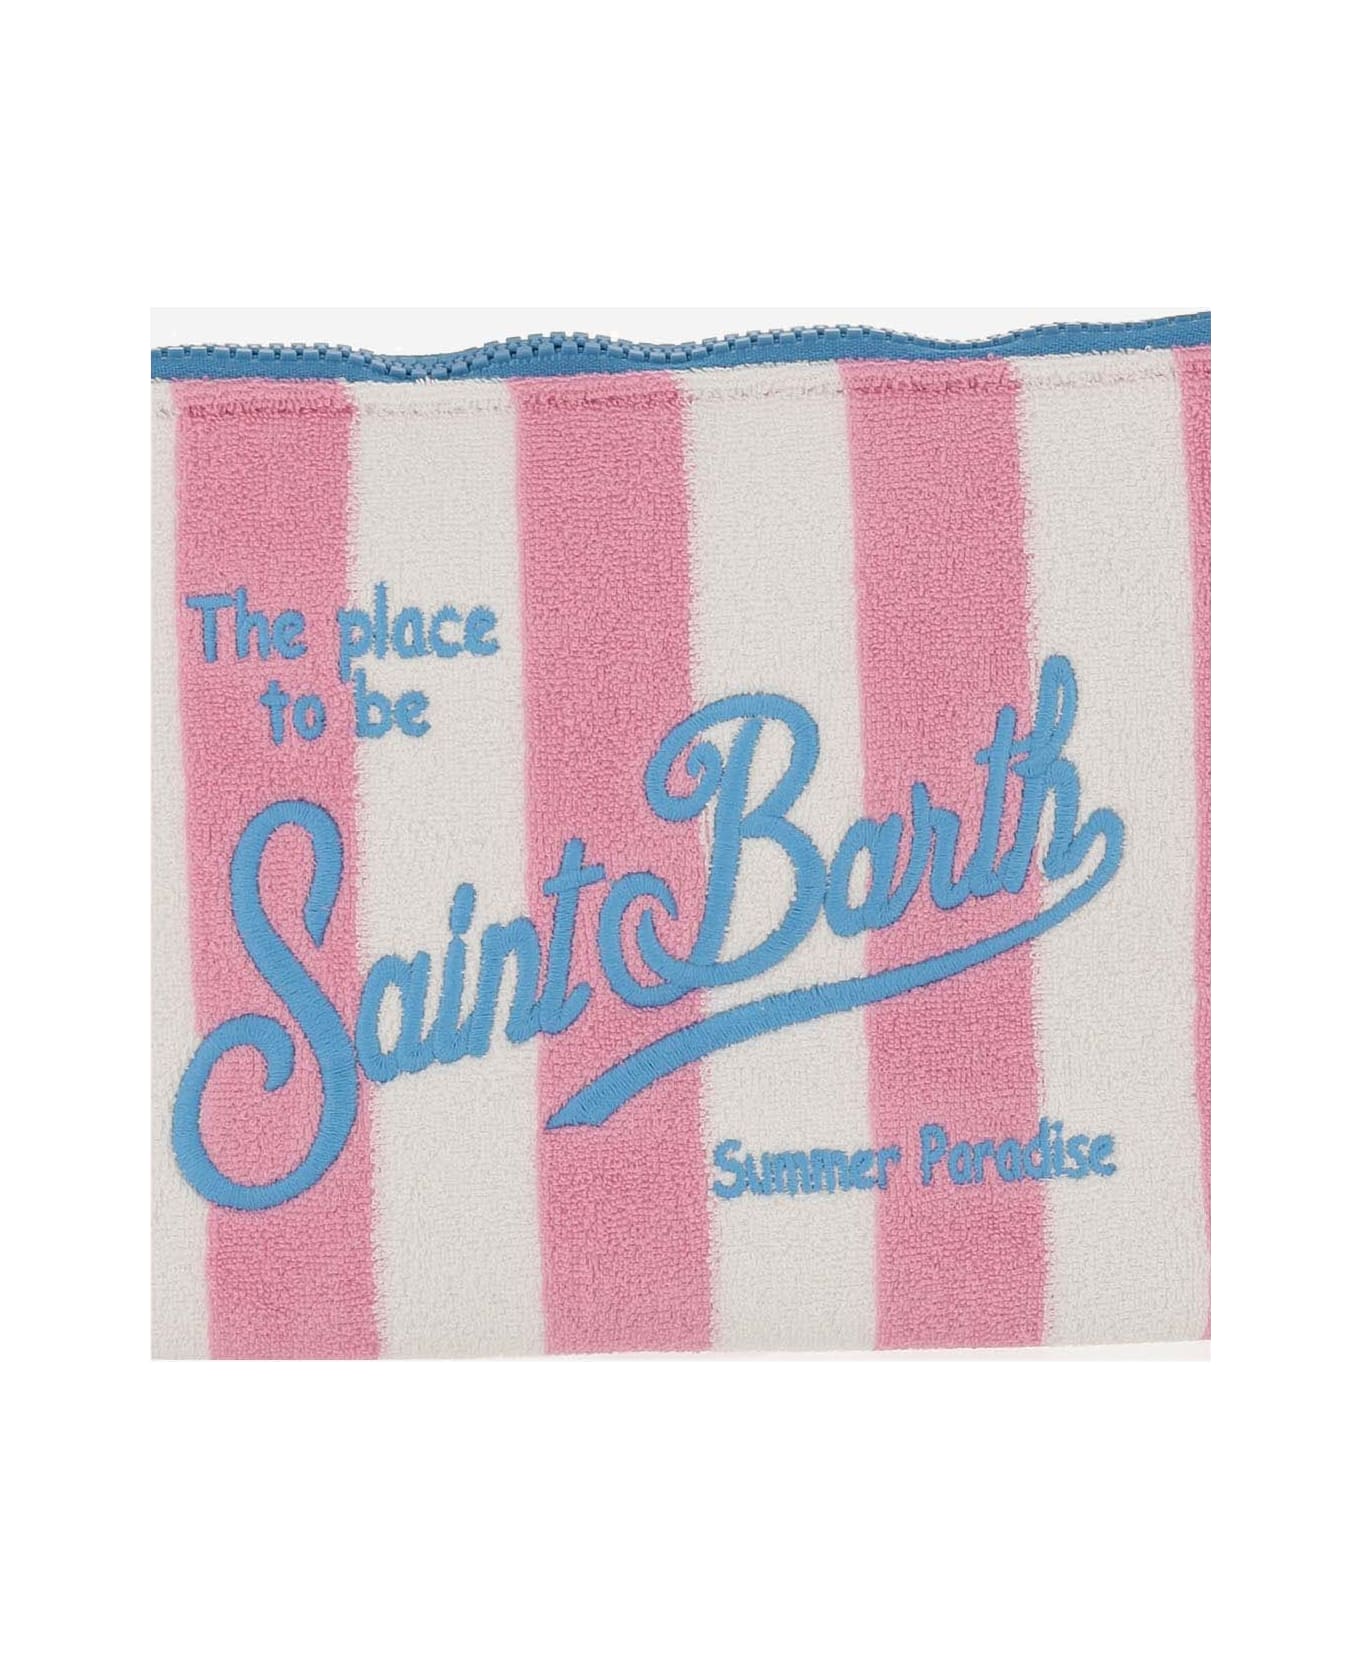 MC2 Saint Barth Fabric Clutch Bag With Striped Pattern - Red クラッチバッグ